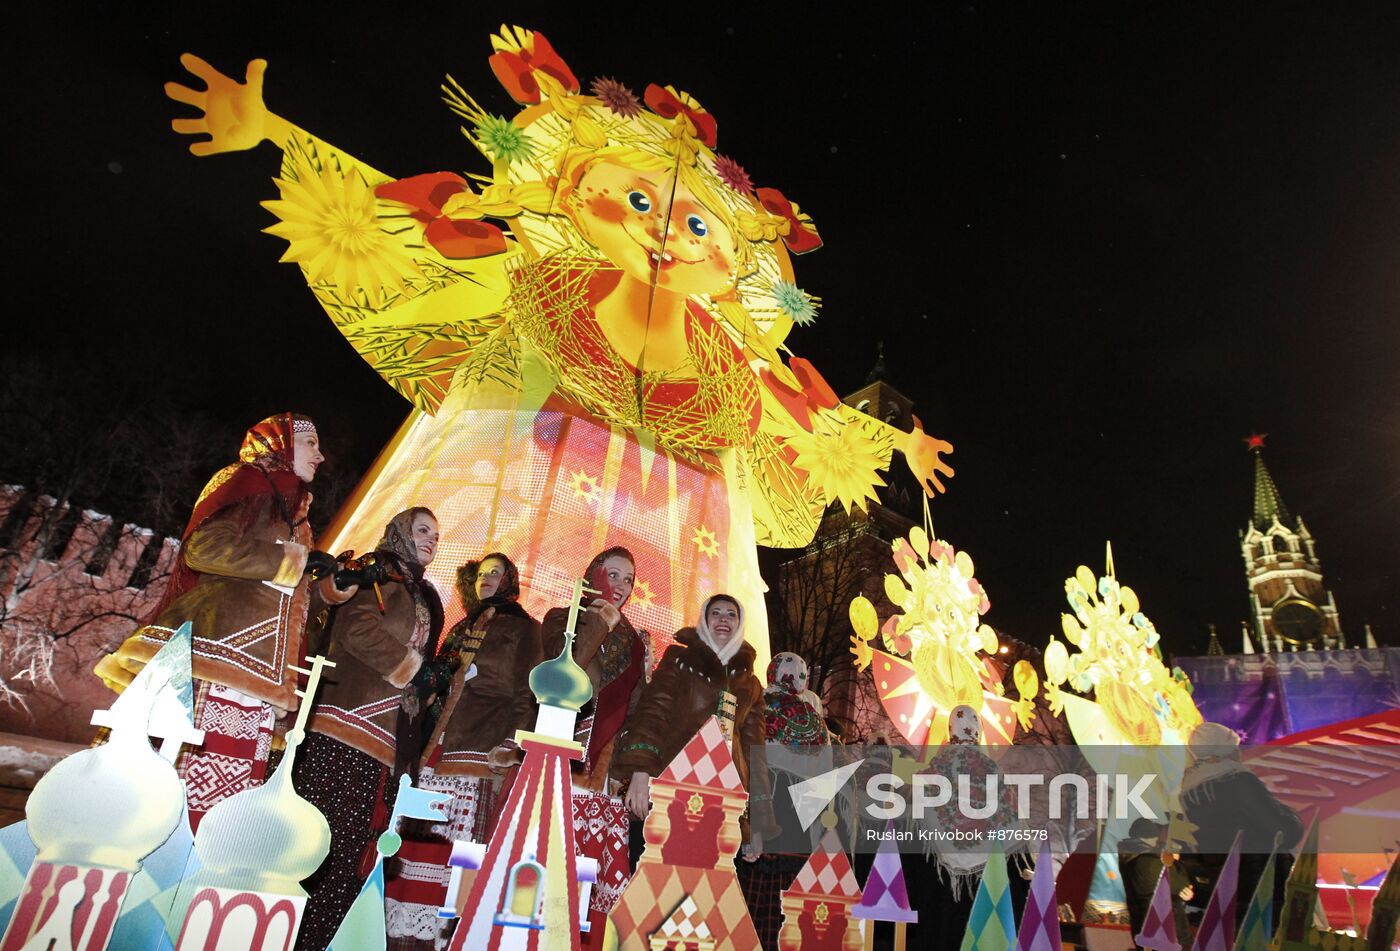 Maslenitsa holiday takes place near St. Basil's in Moscow